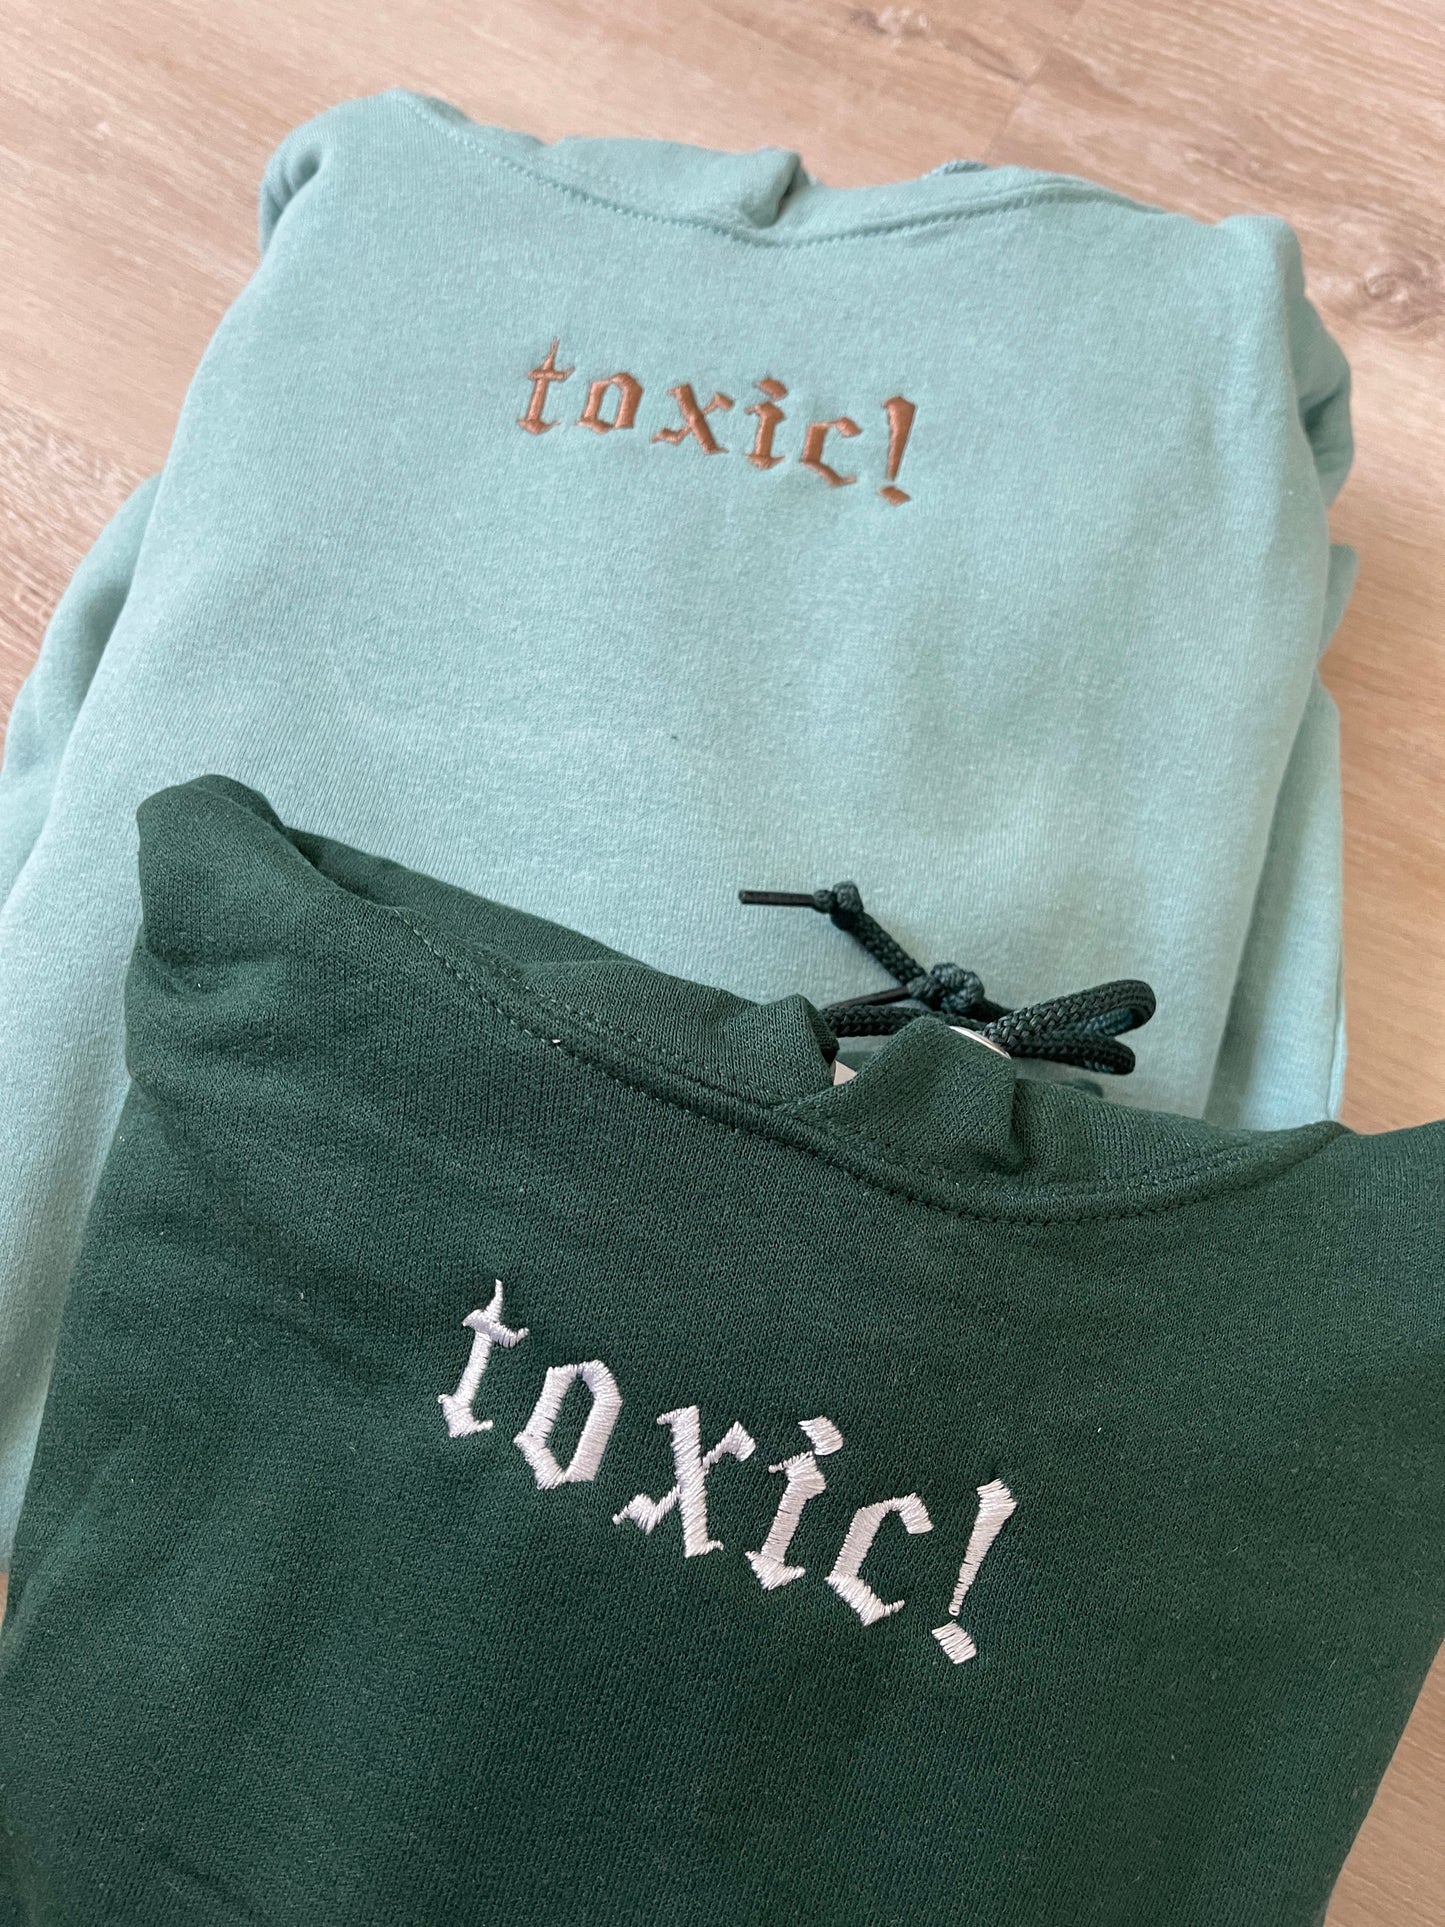 TOXIC! Embroidered Matching Set